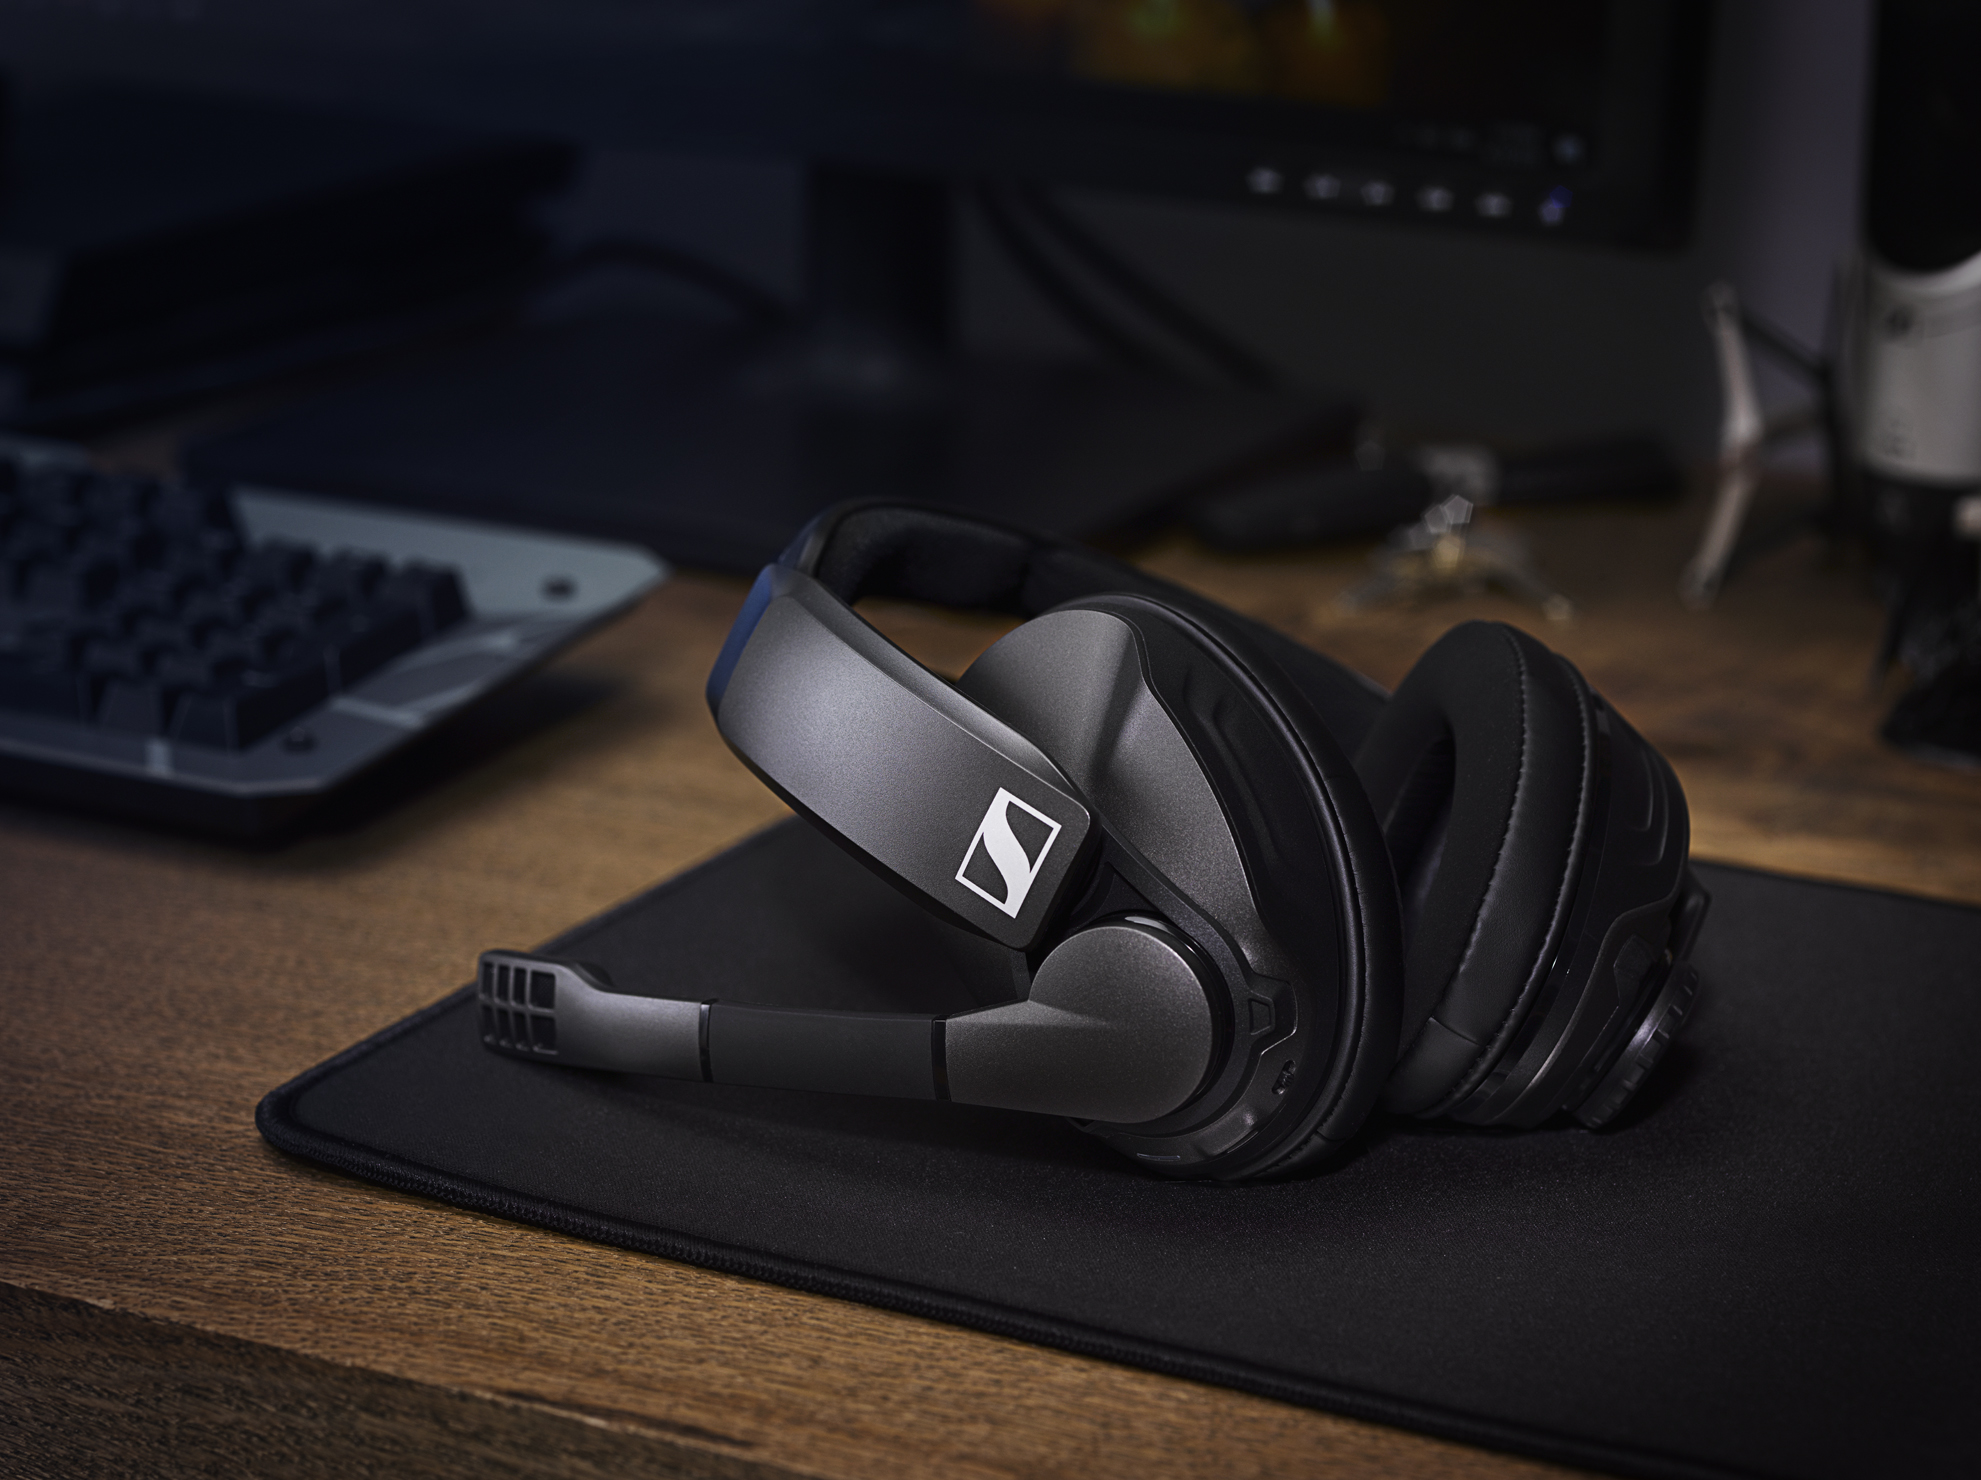 UP TO 100 HOURS OF WIRELESS GAMING